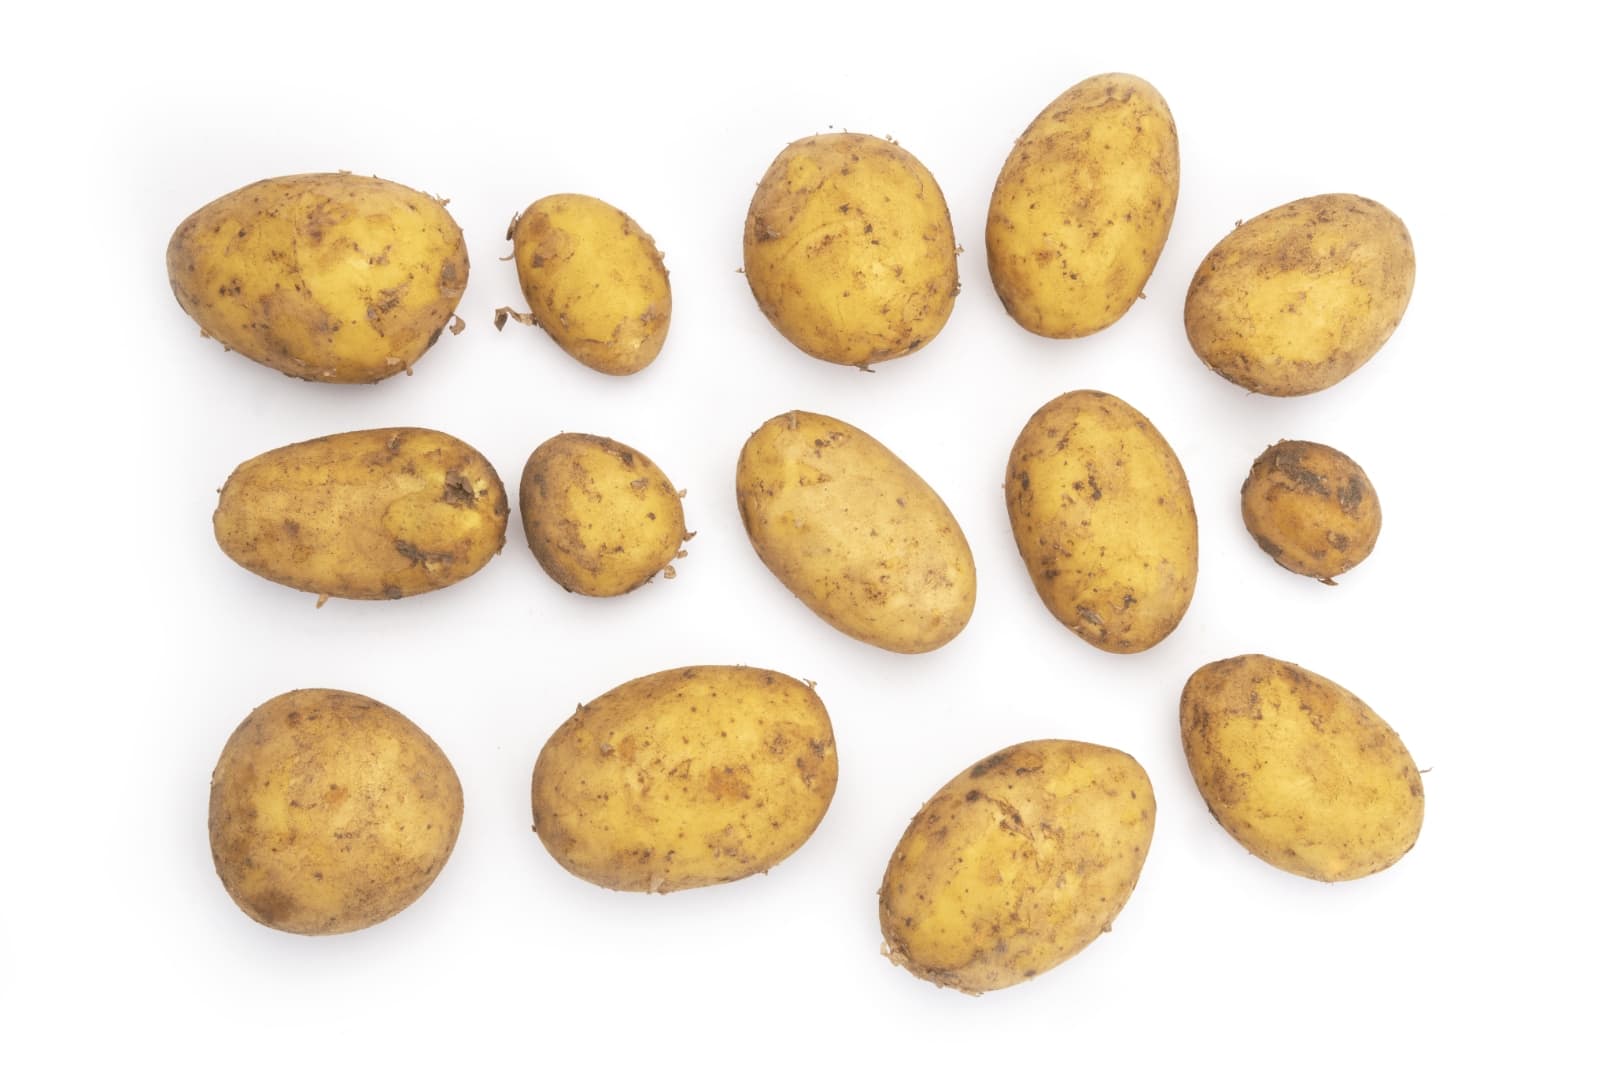 pic-multiple-potatoes-on-white-background-1624x1083